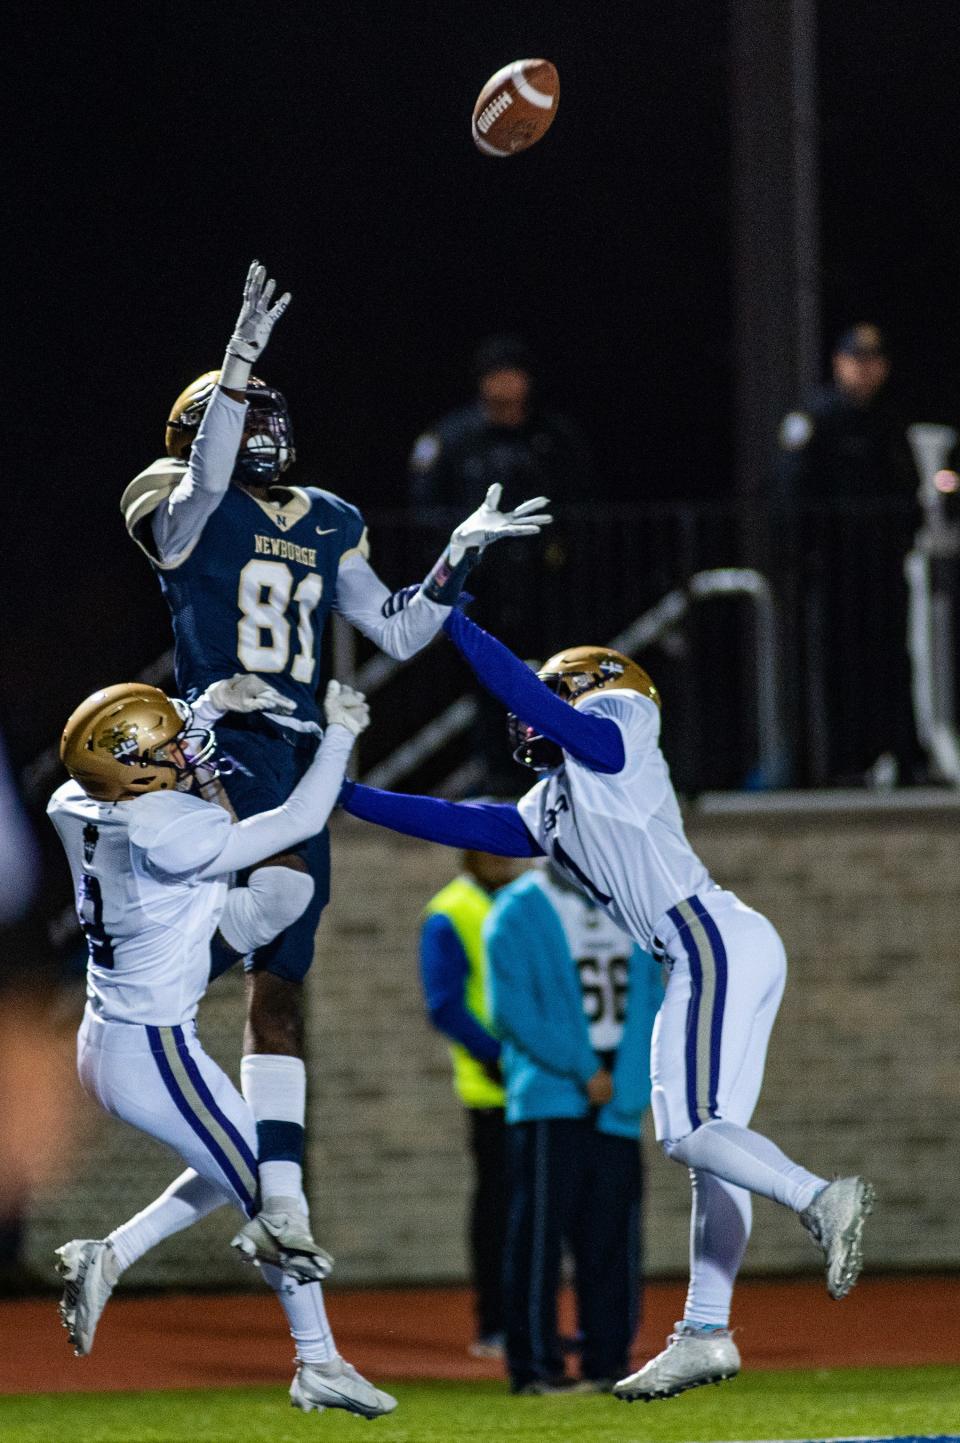 Newburgh's Deondre Johnson leaps up to catch the ball through CBA defenders during the NYSPHSAA Class AA semifinall football game in Middletown, NY on Saturday, November 26, 2022. Newburgh defeated Christian Brothers Academy. KELLY MARSH/FOR THE TIMES HERALD-RECORD